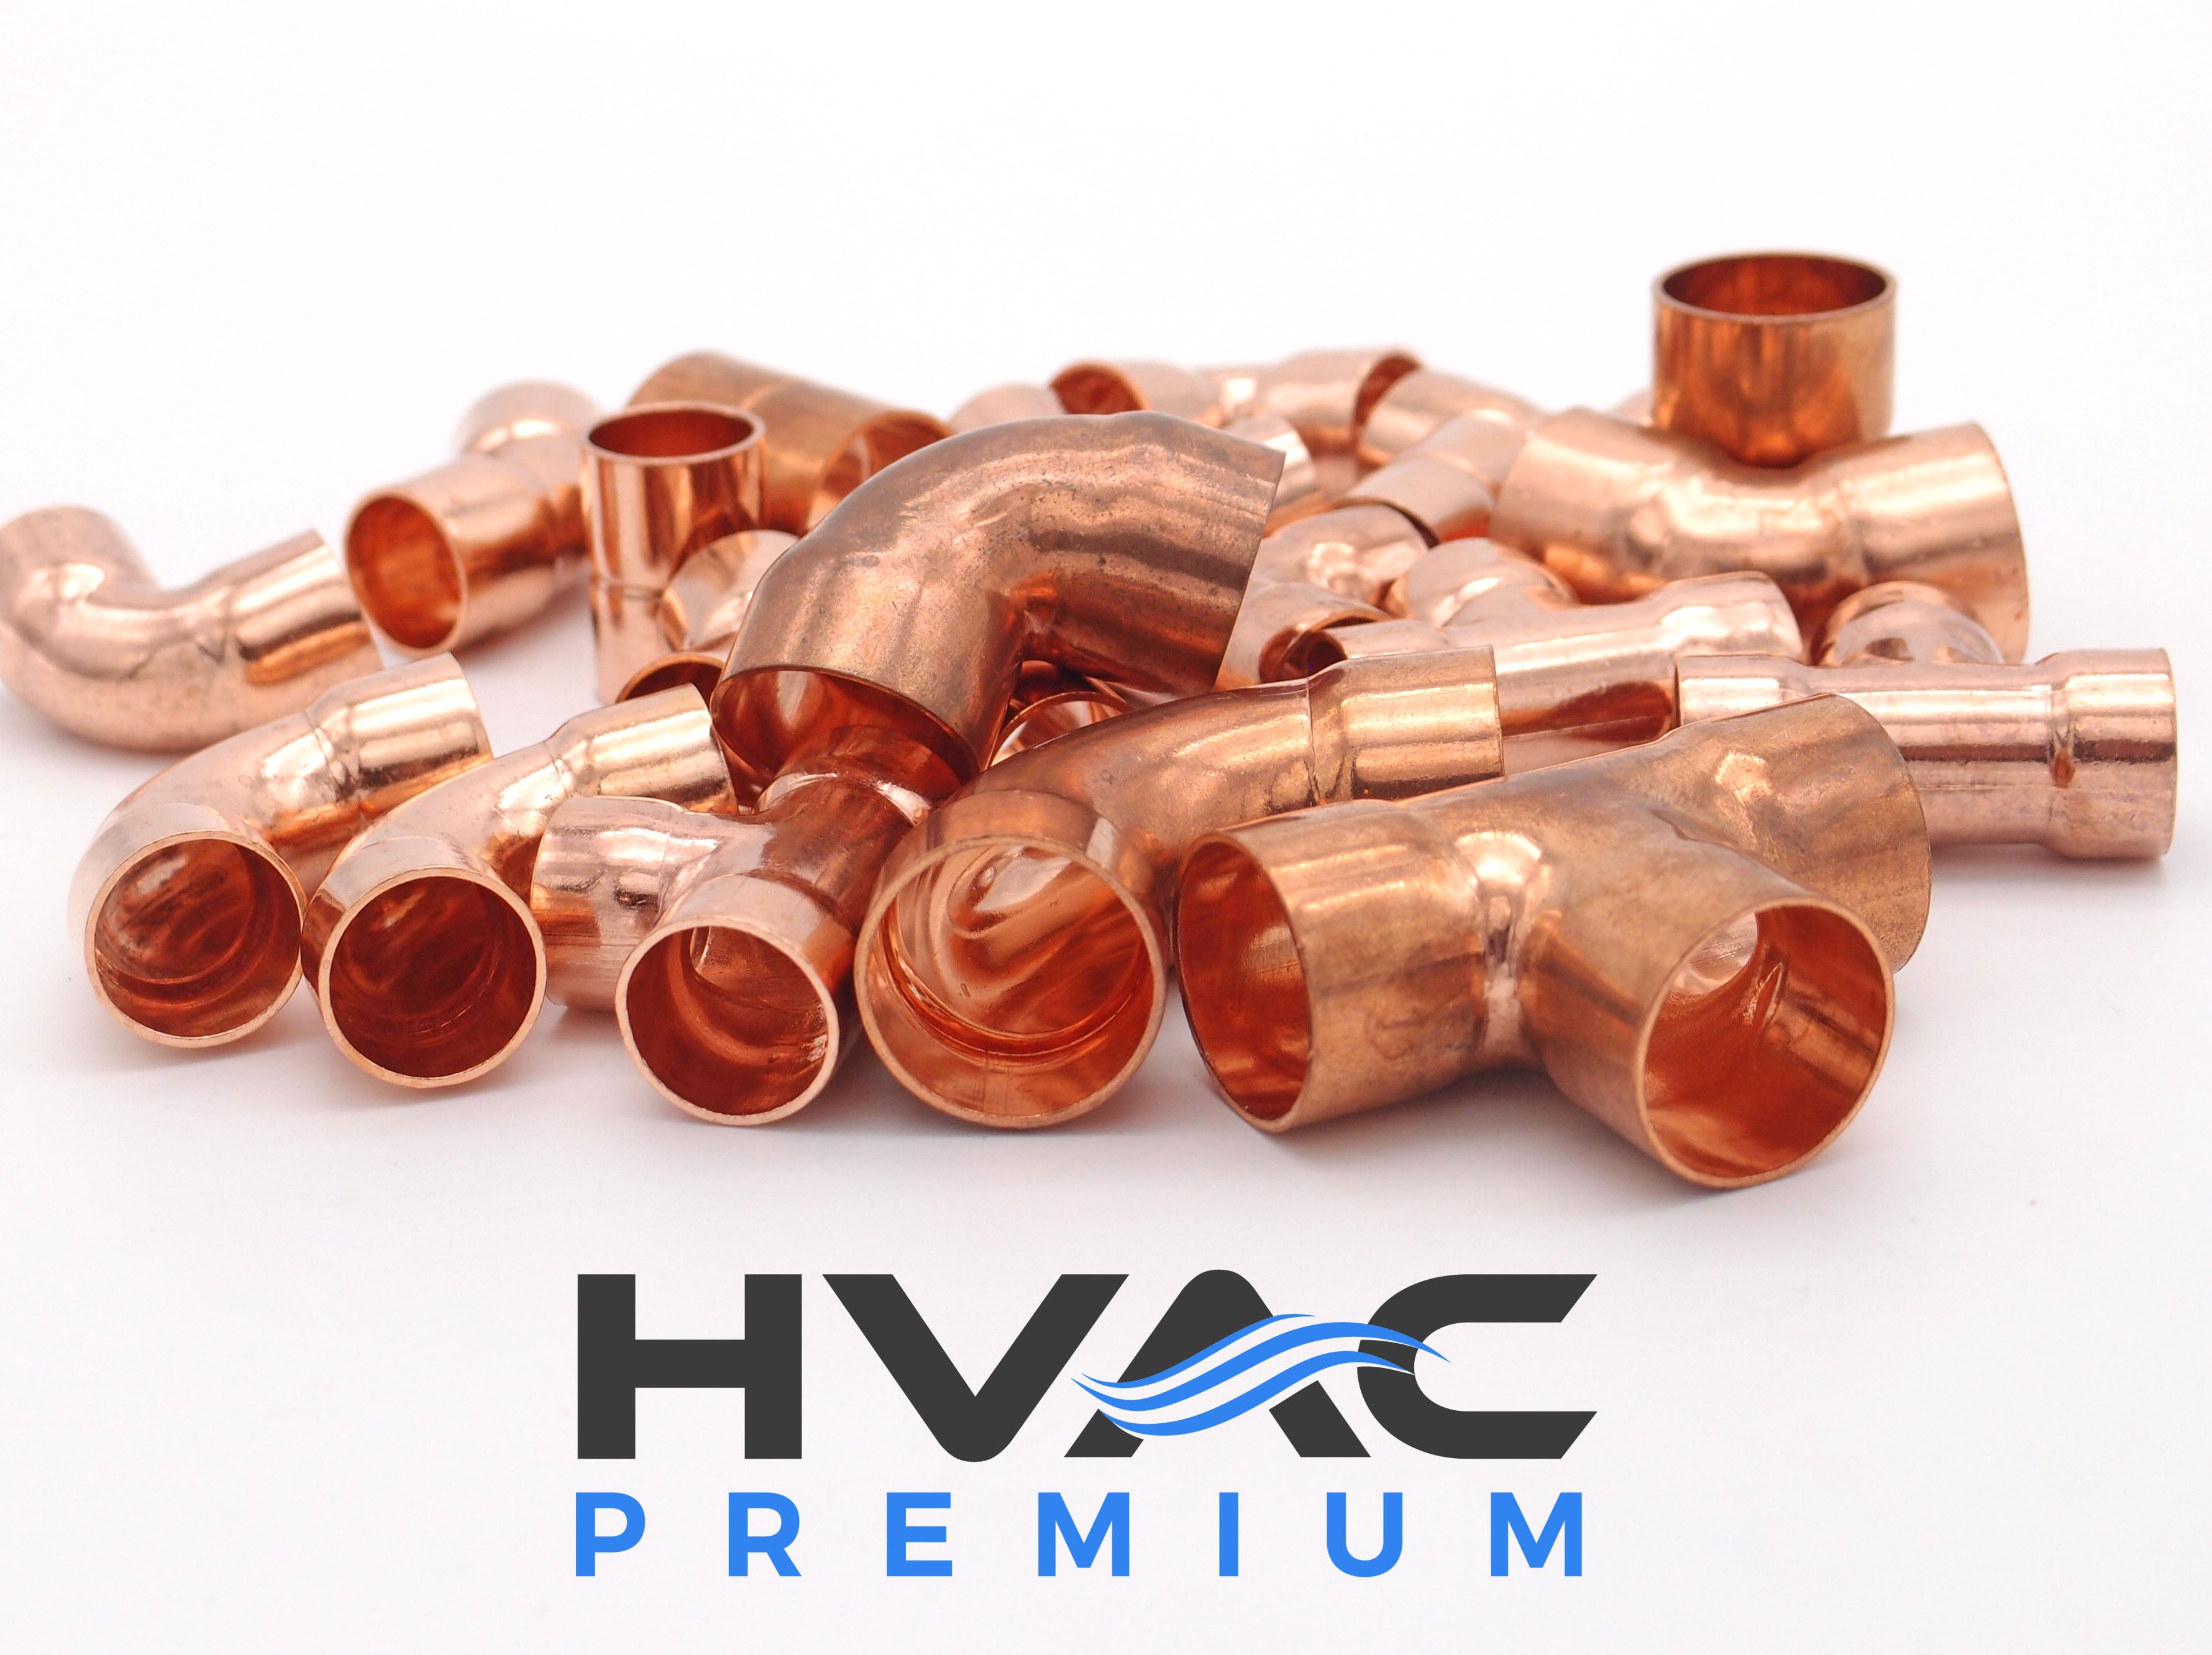 Copper Fitting 5/8 Inch (HVAC Outer Dimension) 1/2 Inch (Plumbing Inner Dimension) - Copper 90 Degree Elbow Fitting Connector - 99.9% Pure Copper - 10 Pack